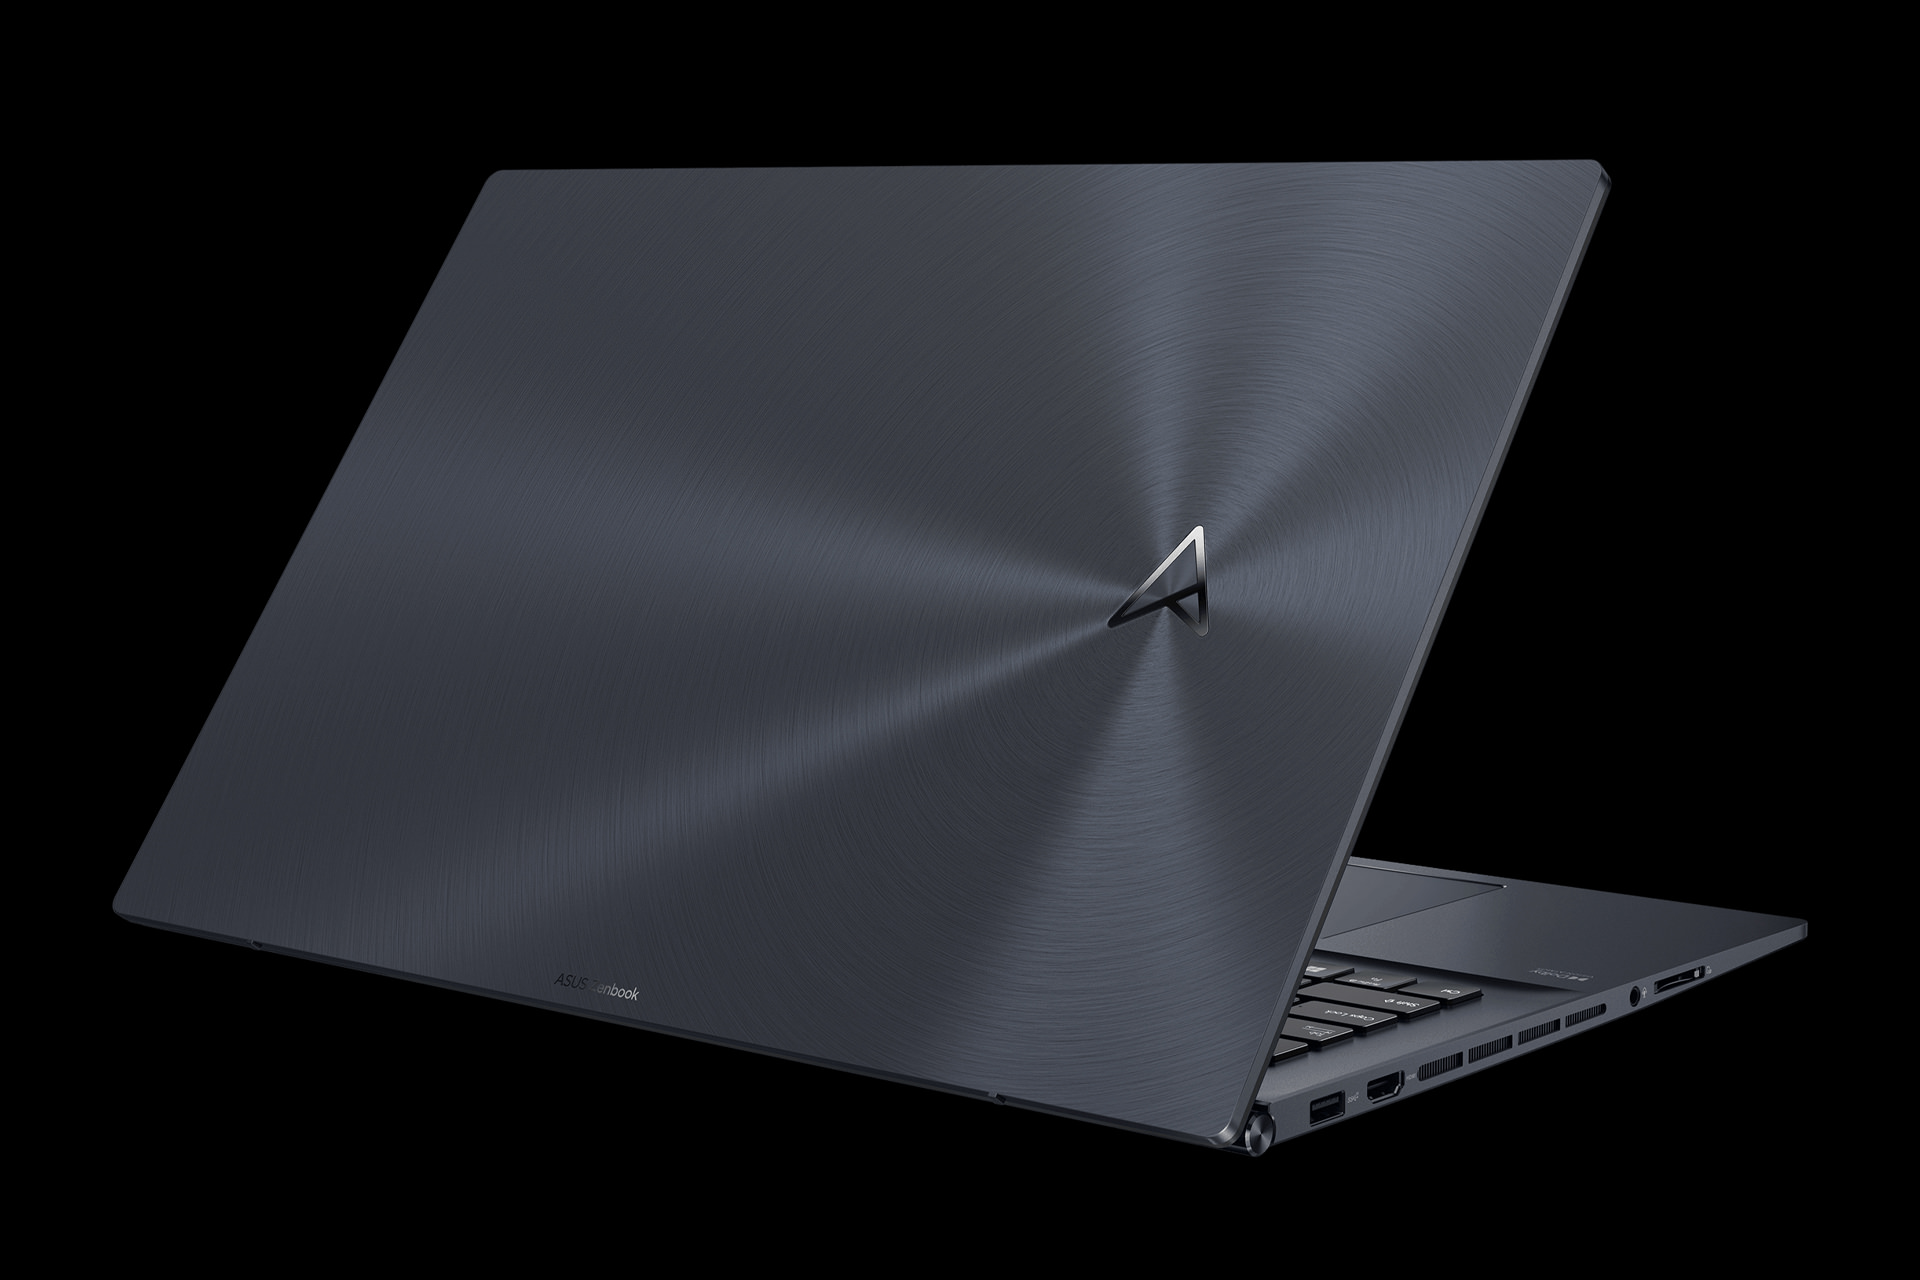 Asus Zenbook Pro 17 Asus laptop from the back